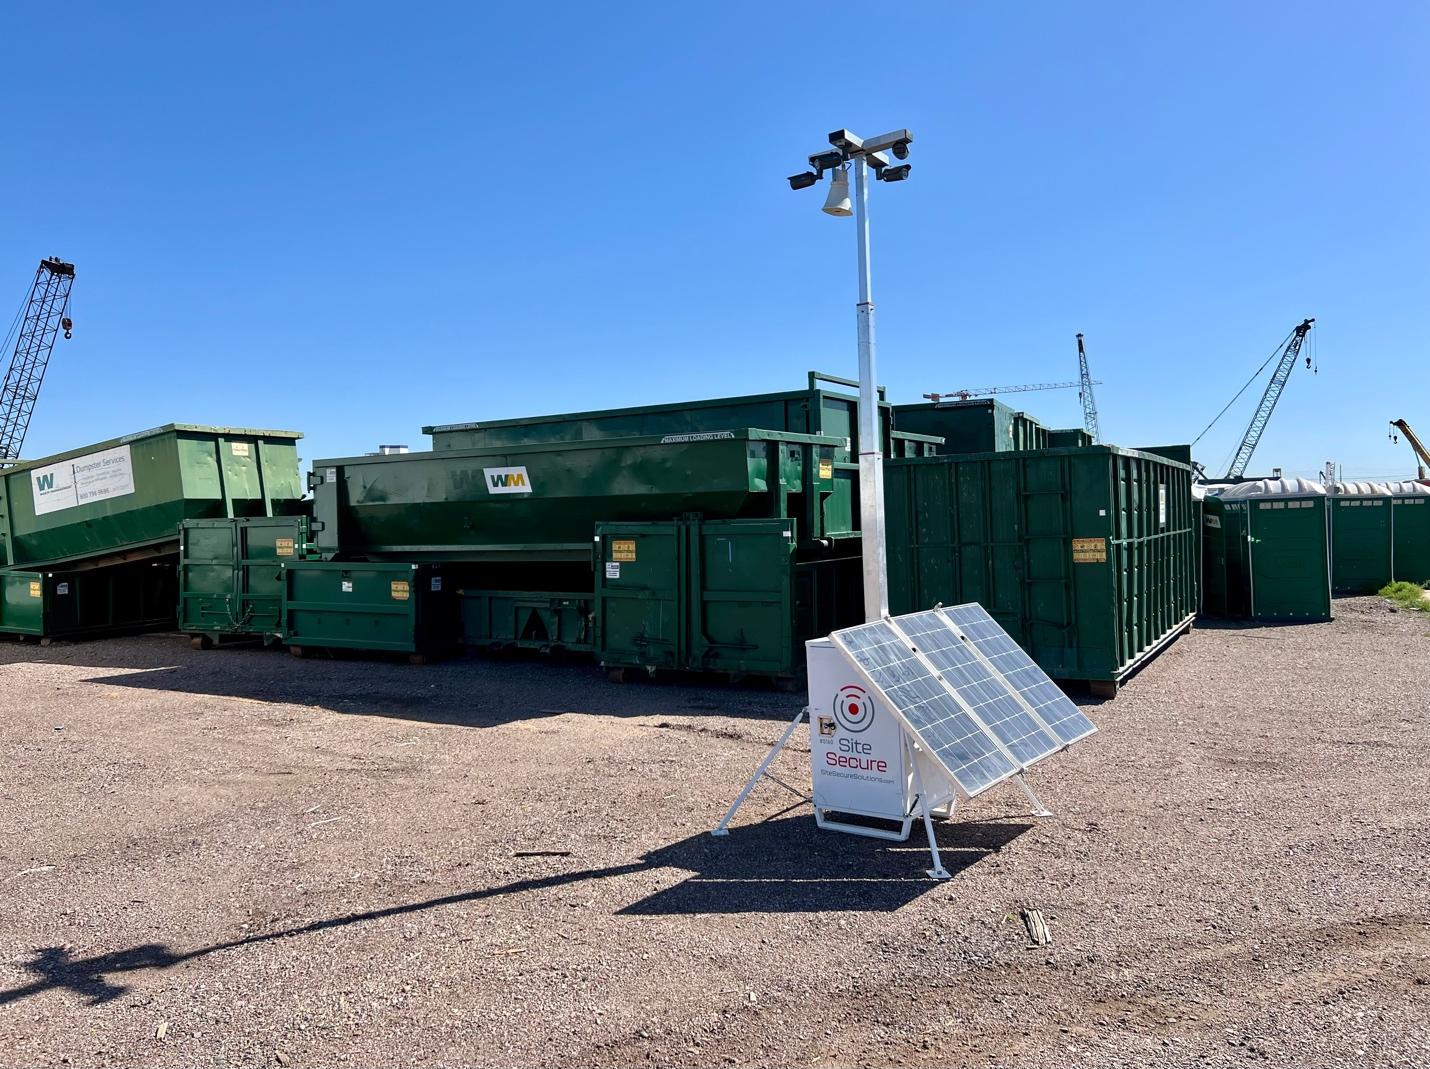 Waste Management Yard Monitored by Site Secure in Phoenix, Arizona.